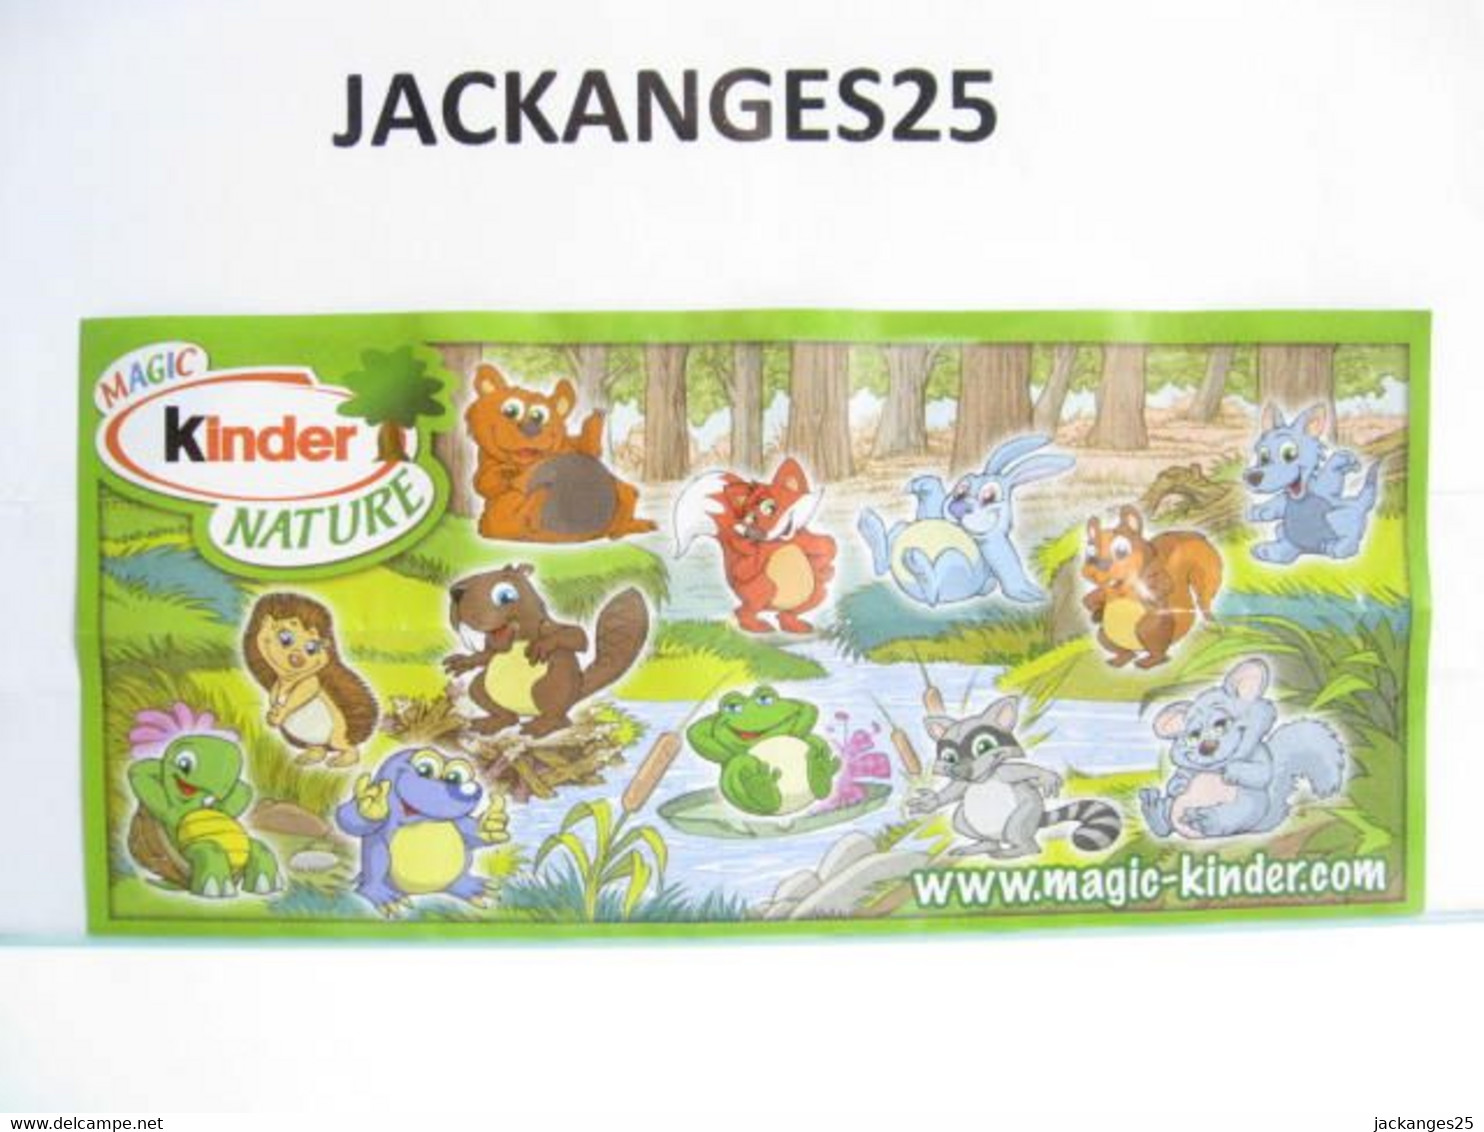 KINDER MPG UN 13 A GRENOUILLE ANIMAUX NATURE NATOONS TIERE 2010  2011 + BPZ A NATURE - Familles